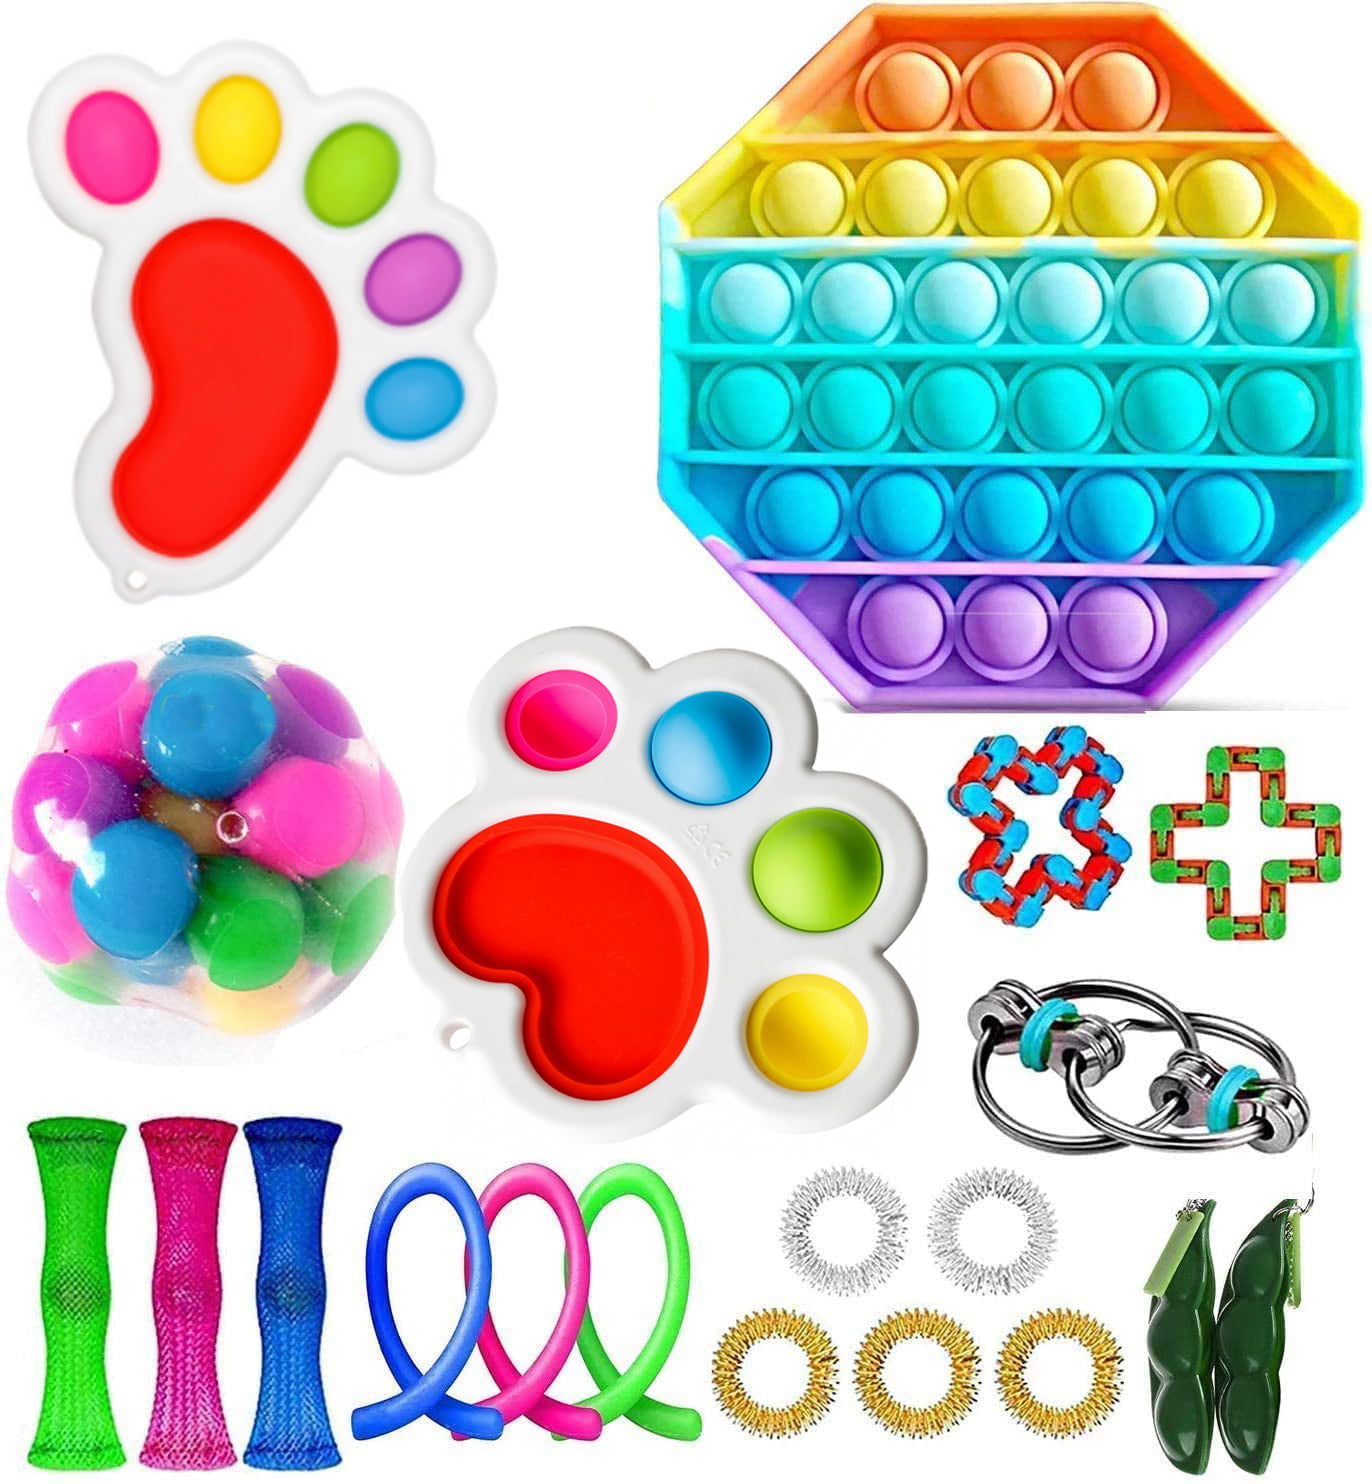 Details about   Mesh & Marble Fidget Toy Anxiety Stress Relief Adult Kids Autism Soothing Toys 